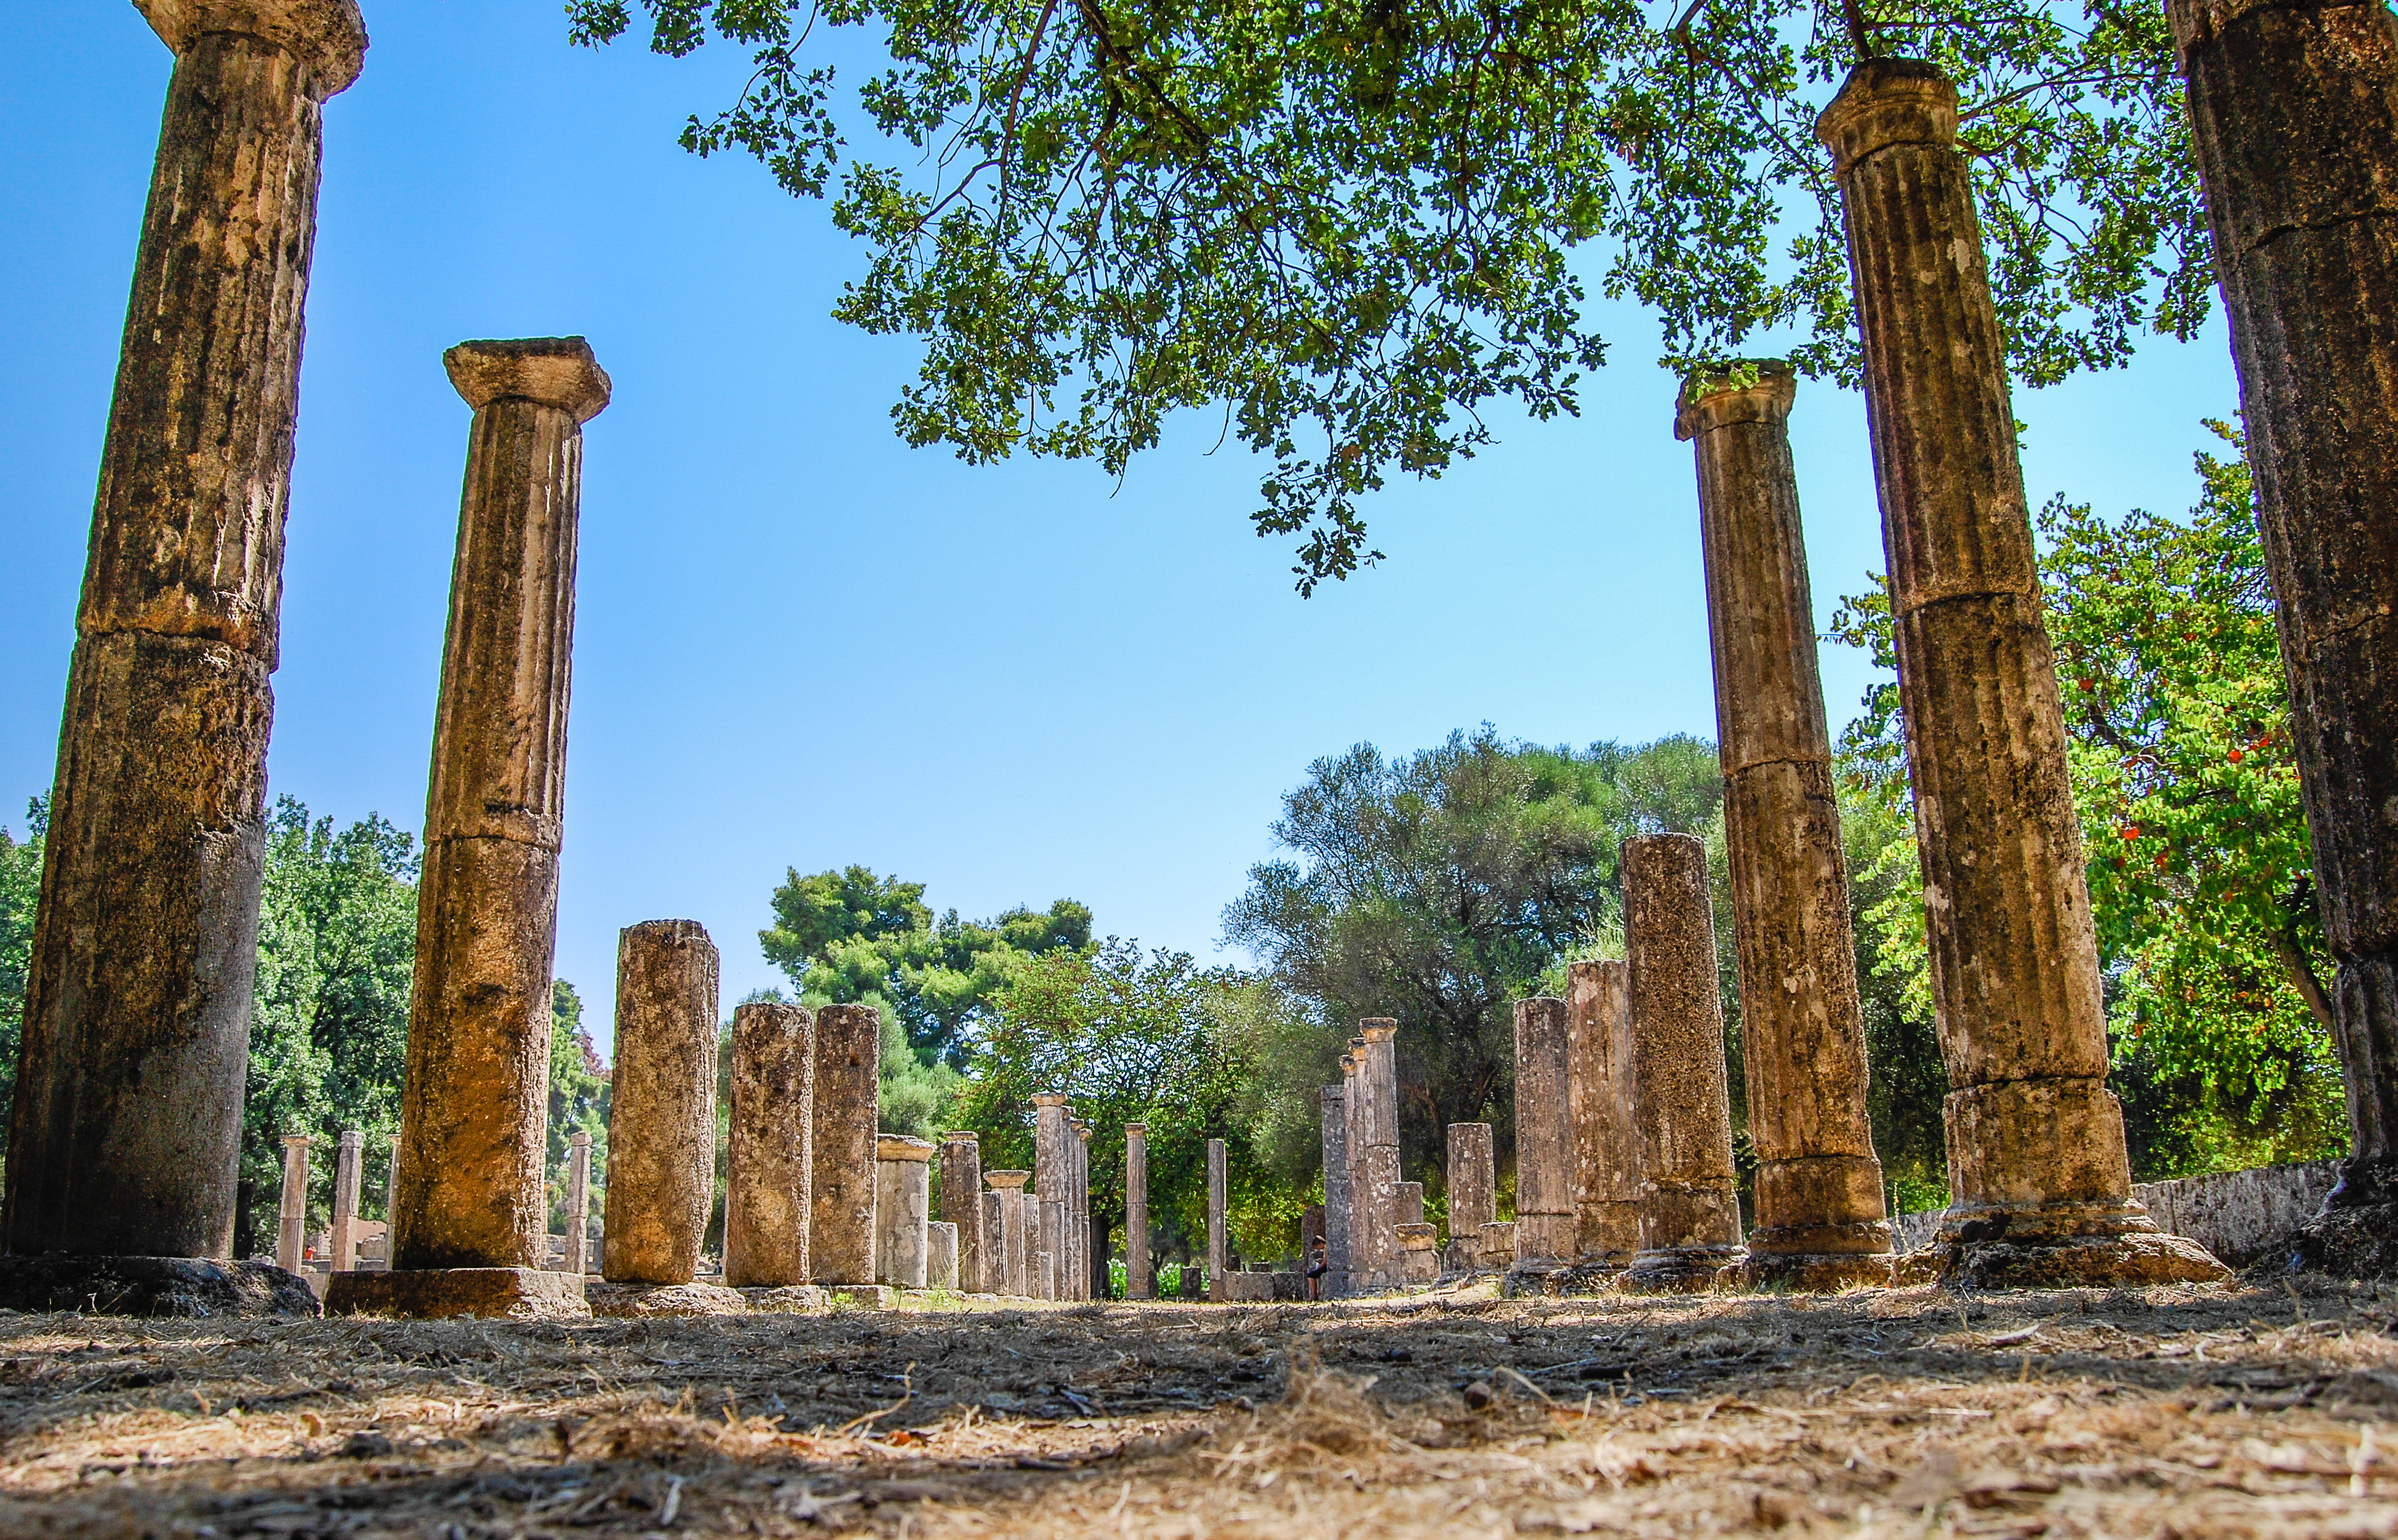 Pathway lined with ancient columns in Olympia, Greece